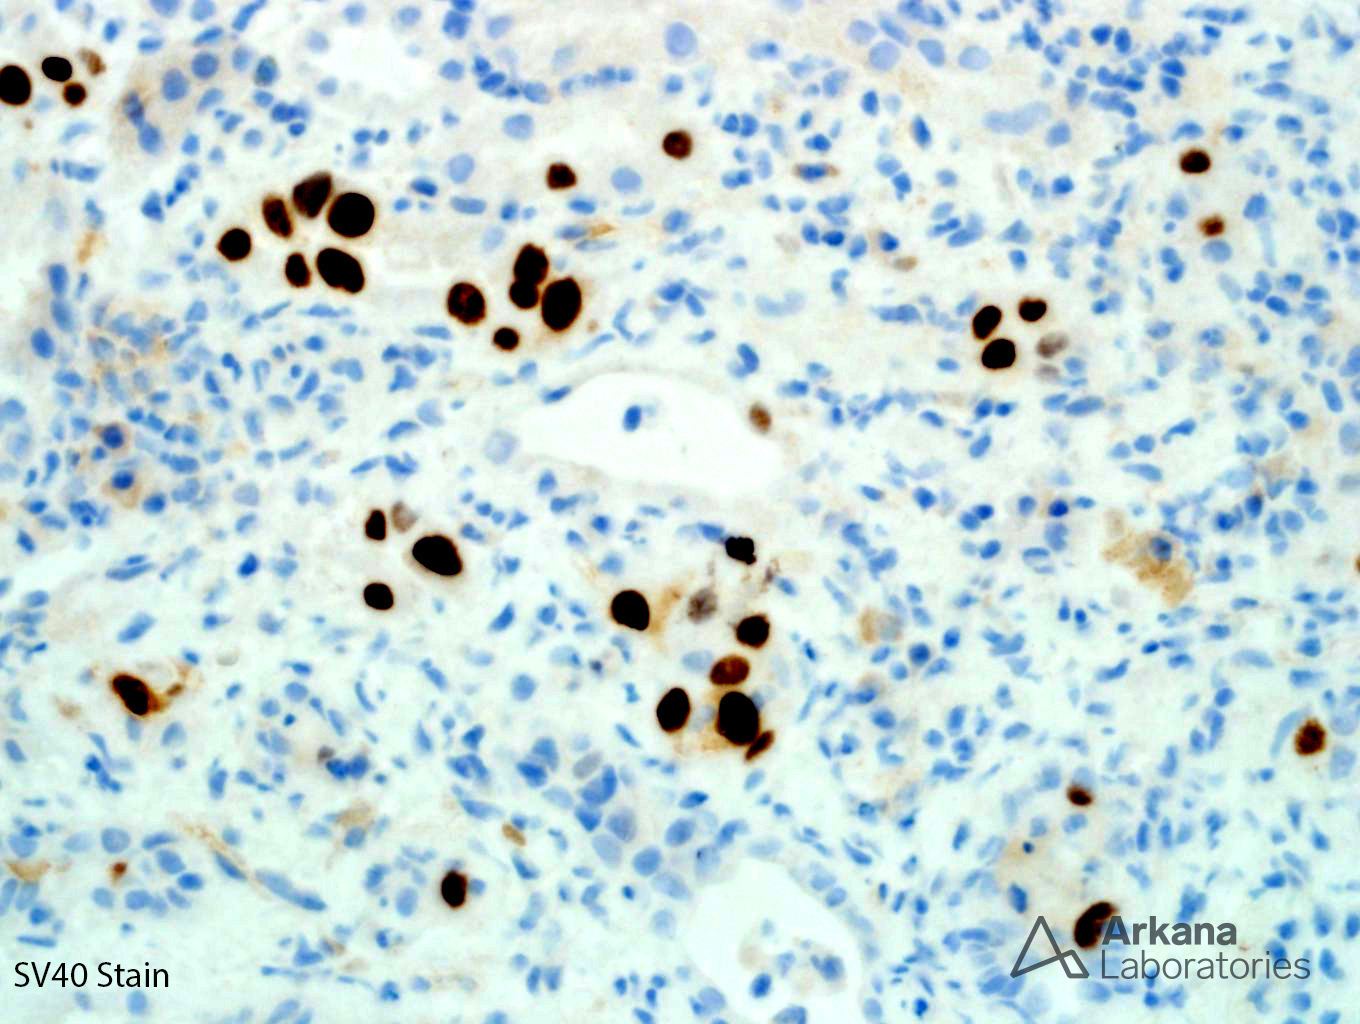 large B-cell lymphoma, A SV40 stain confirms the presence of BK nephritis